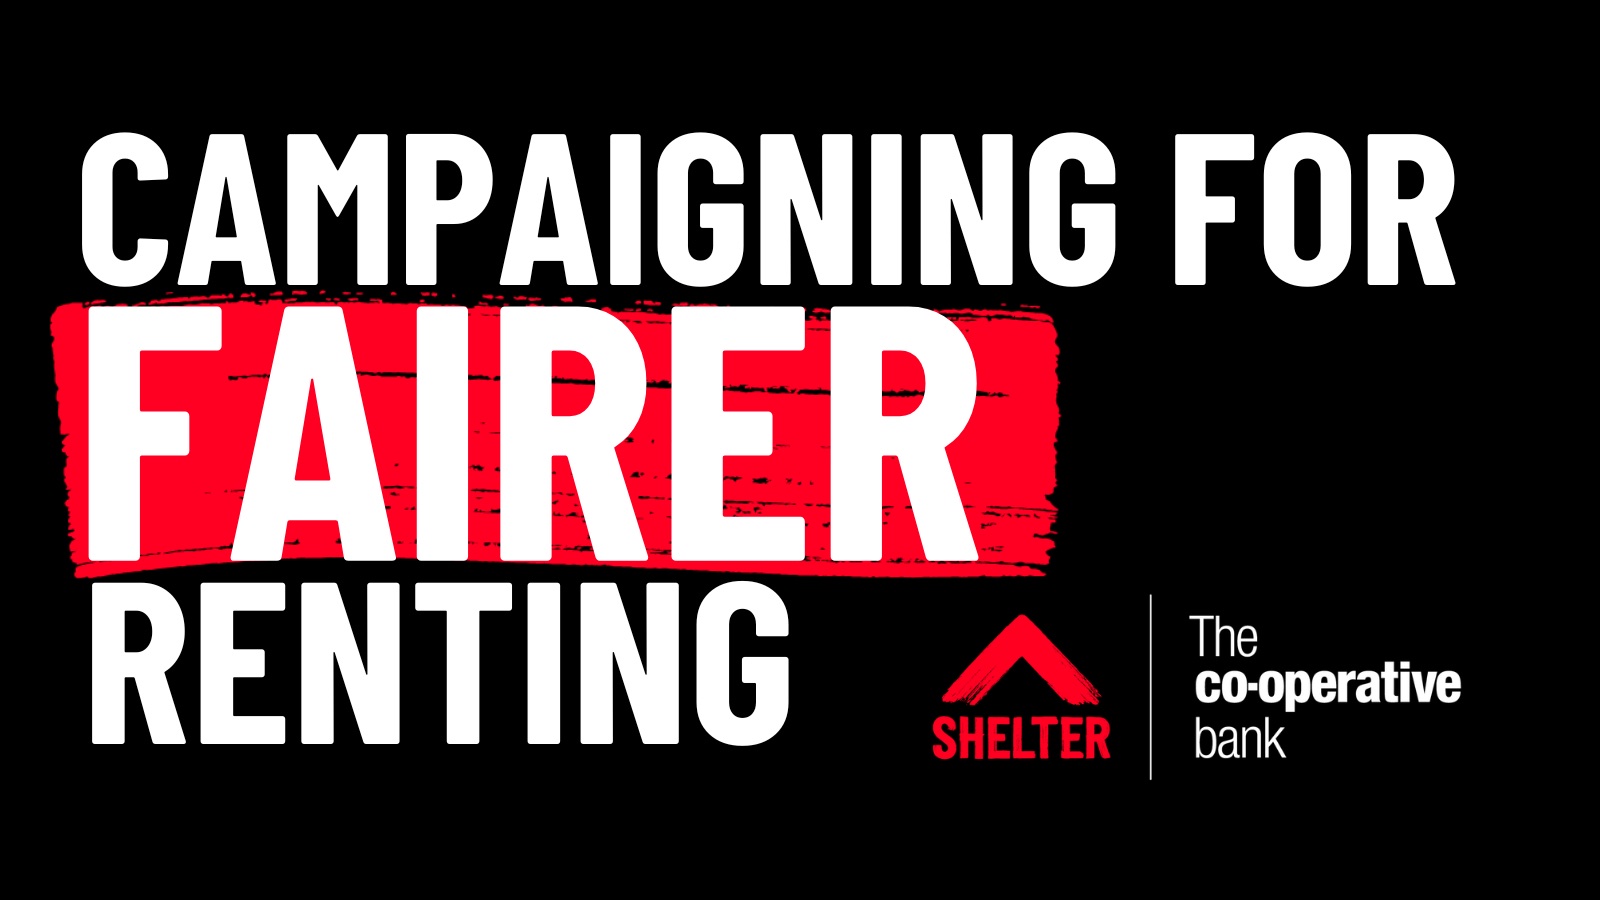 An impactful logo that says Campaigning for Fairer Renting in white text against a black background, with the Shelter and Co-Op bank logo in the lower corner.